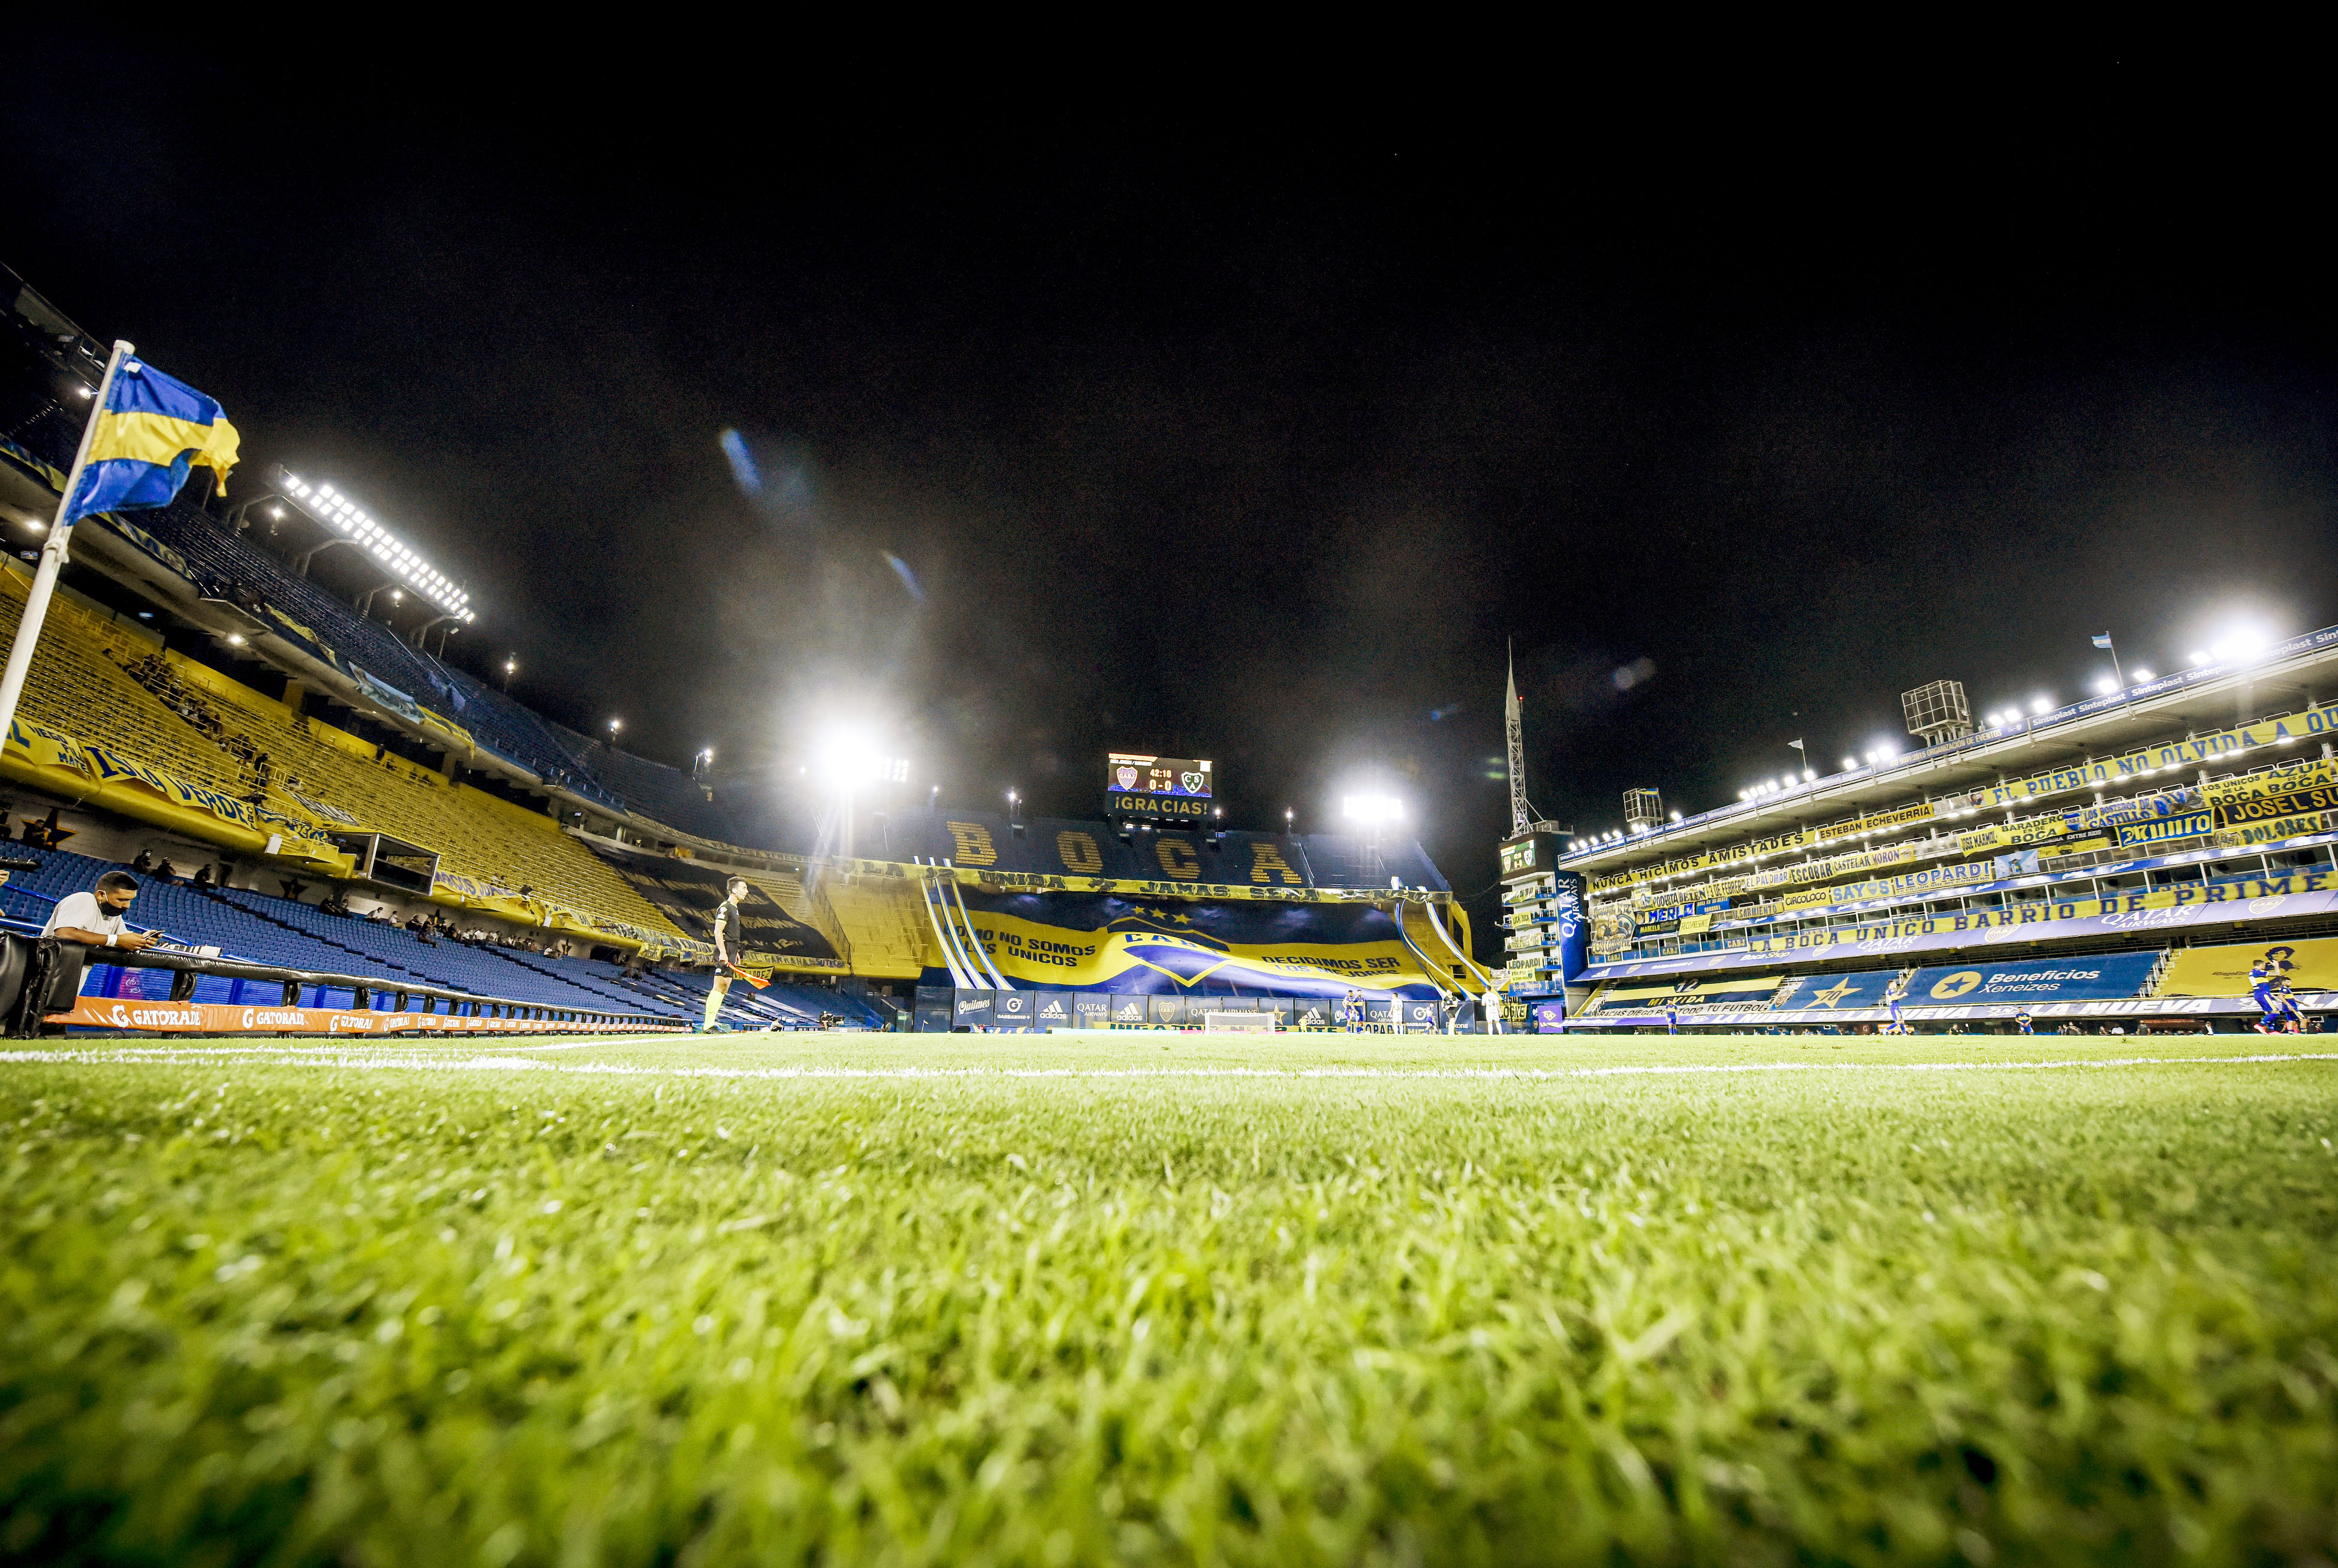 Grass developed in Lincoln has been sown at the headquarters of Argentine football giant Boca...